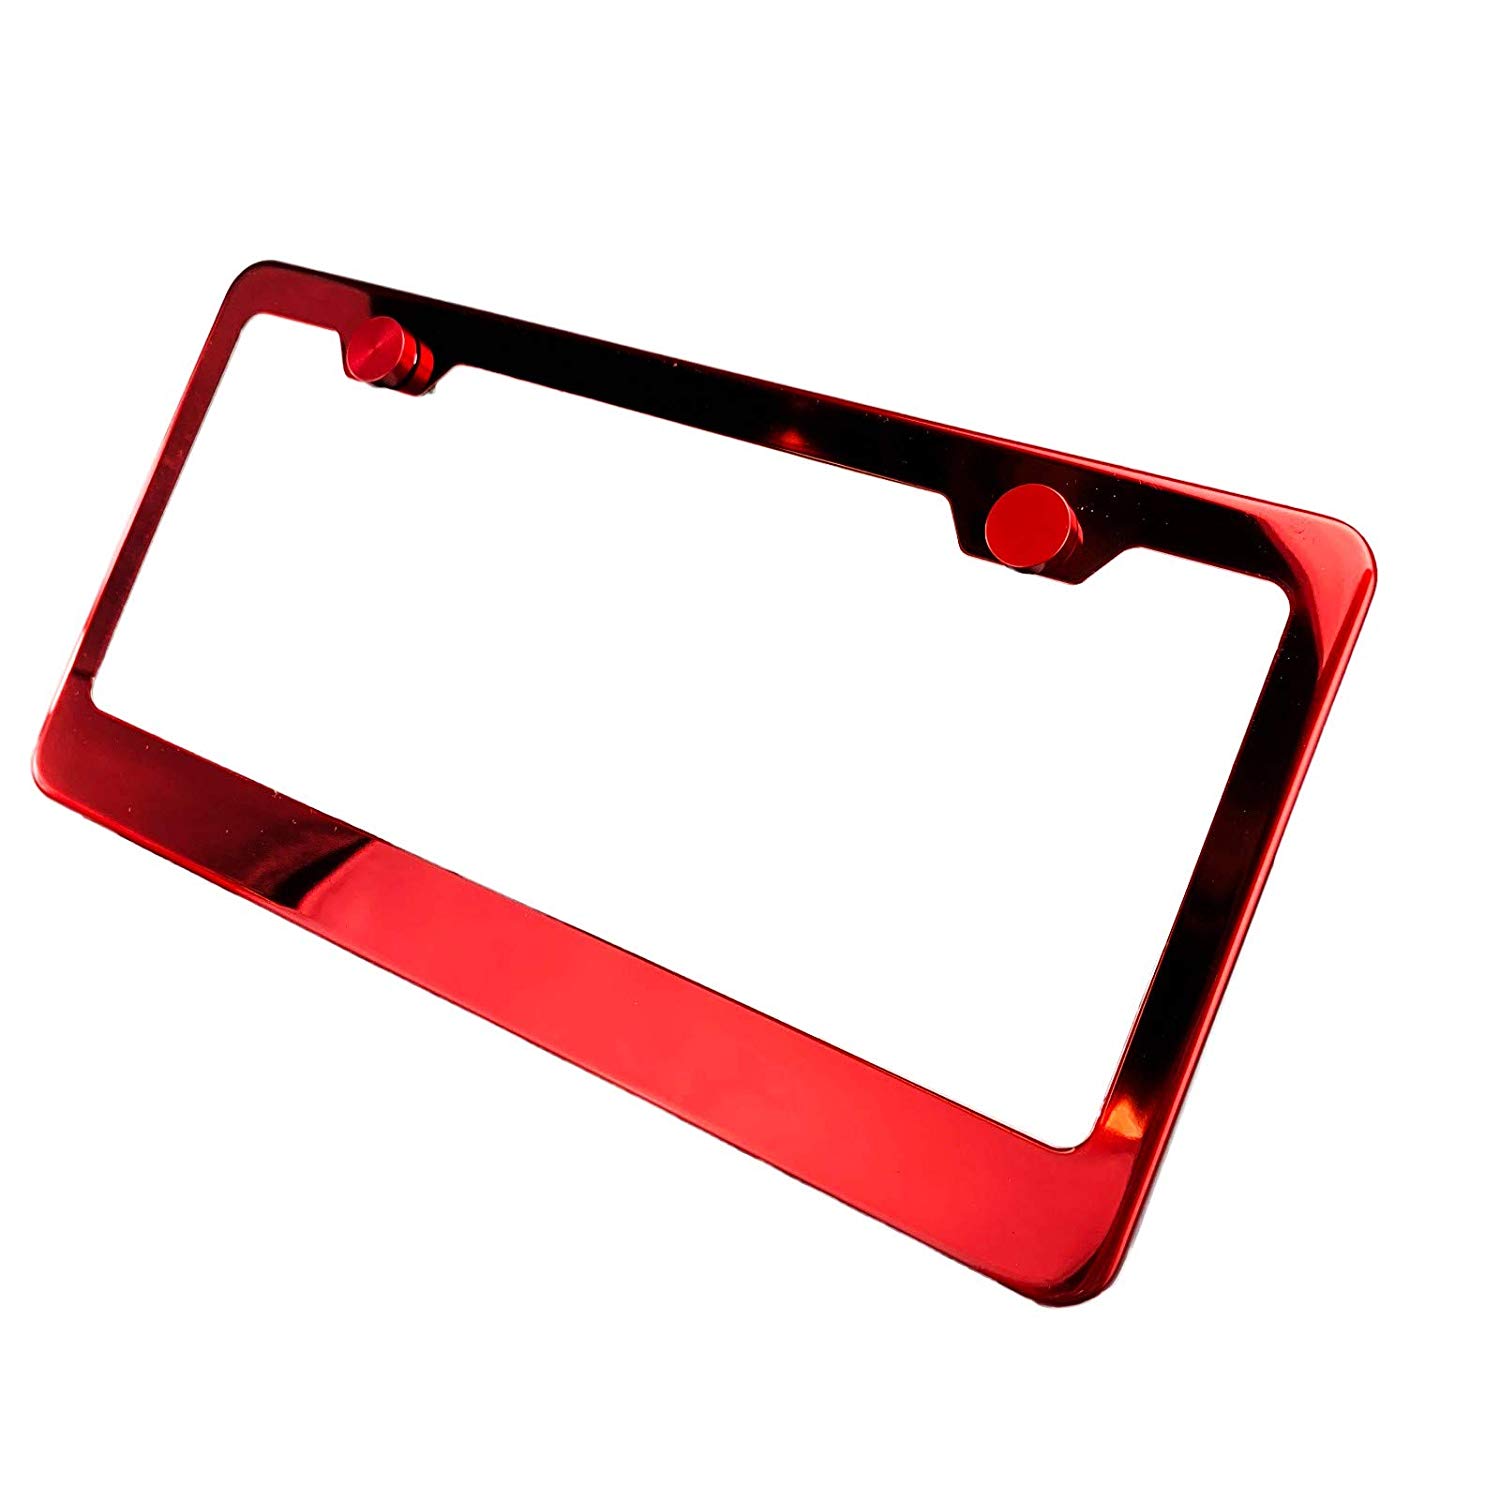 Powder Coated Candy Red Frame Holder Stainless Steel License Plate Tesla Jeep 